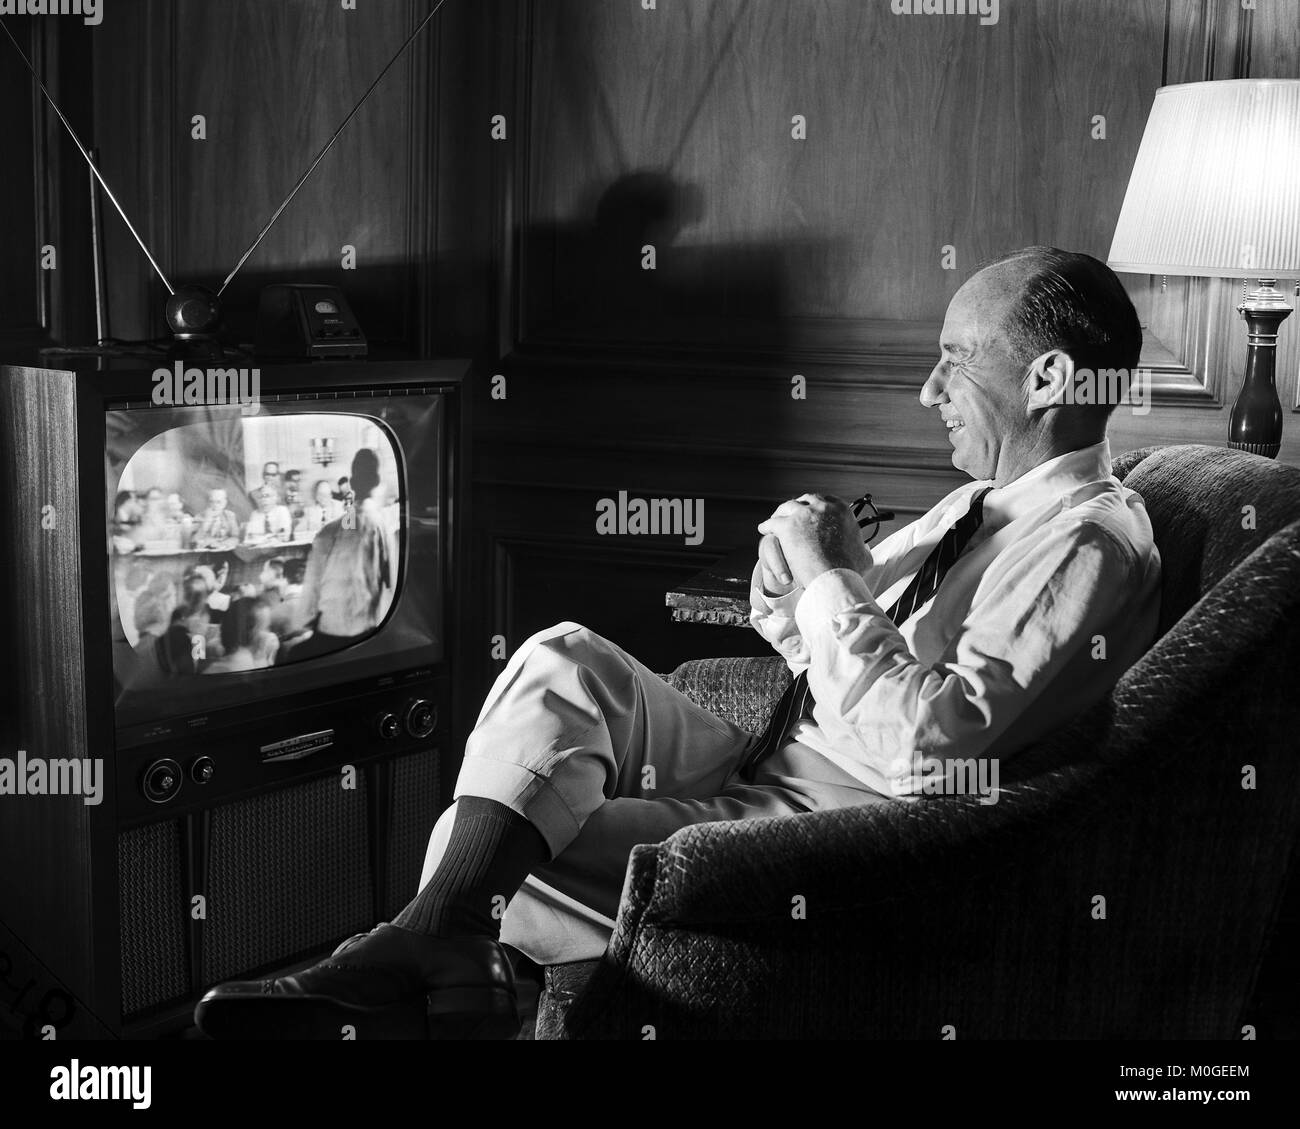 Governor Adlai Stevenson watches the Democratic convention on TV at the home of William McCormick Blair Jr. in Chicago. July 22, 1952. Stock Photo